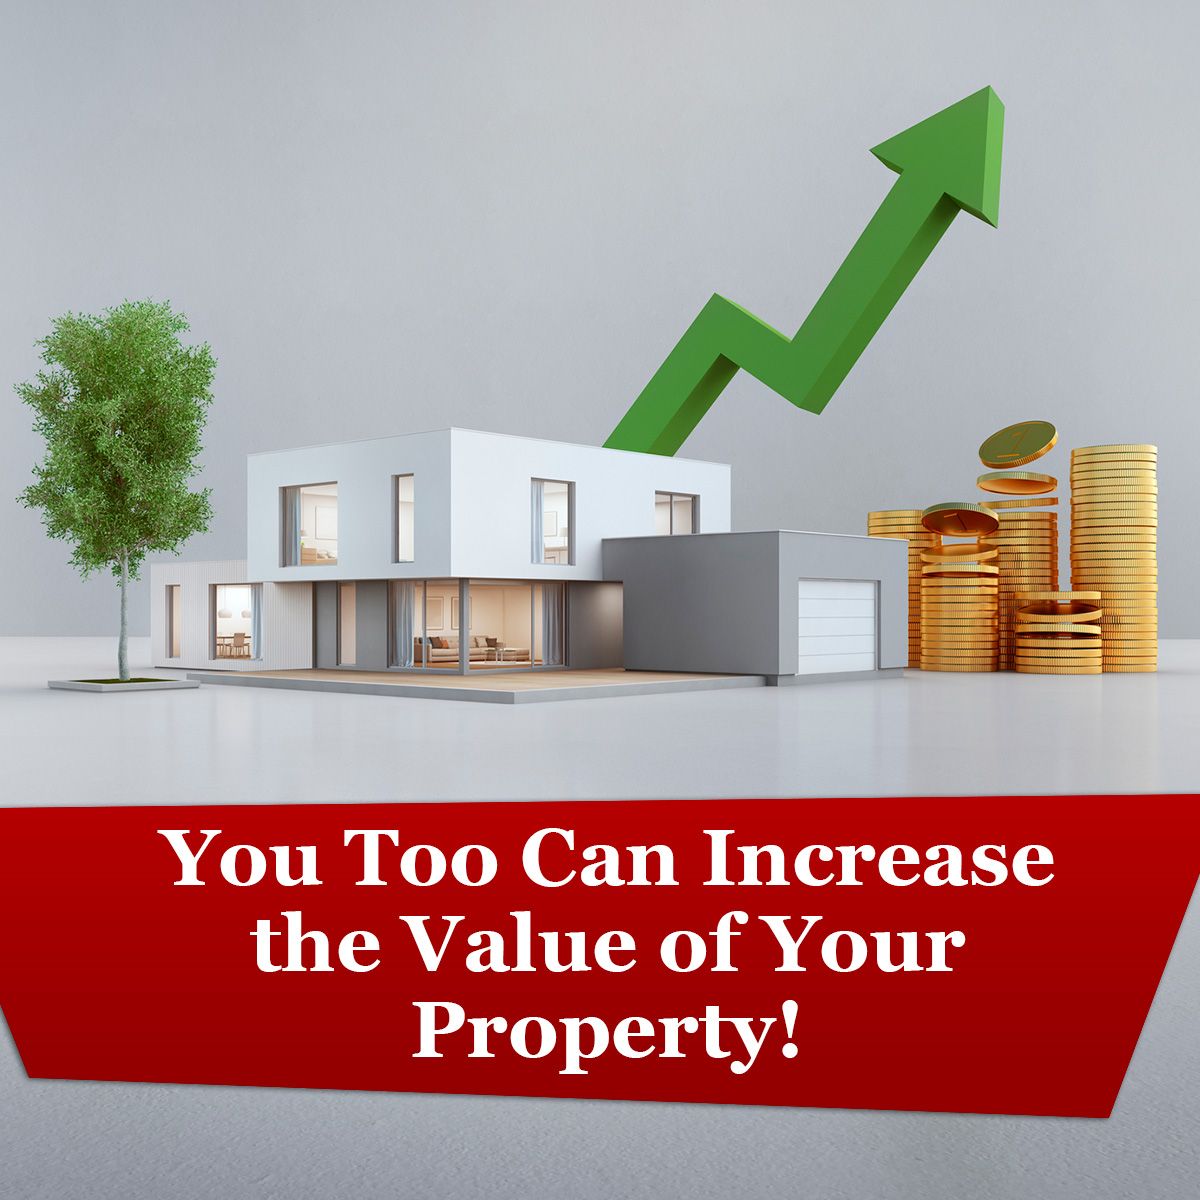 You Too Can Increase the Value of Your Property!